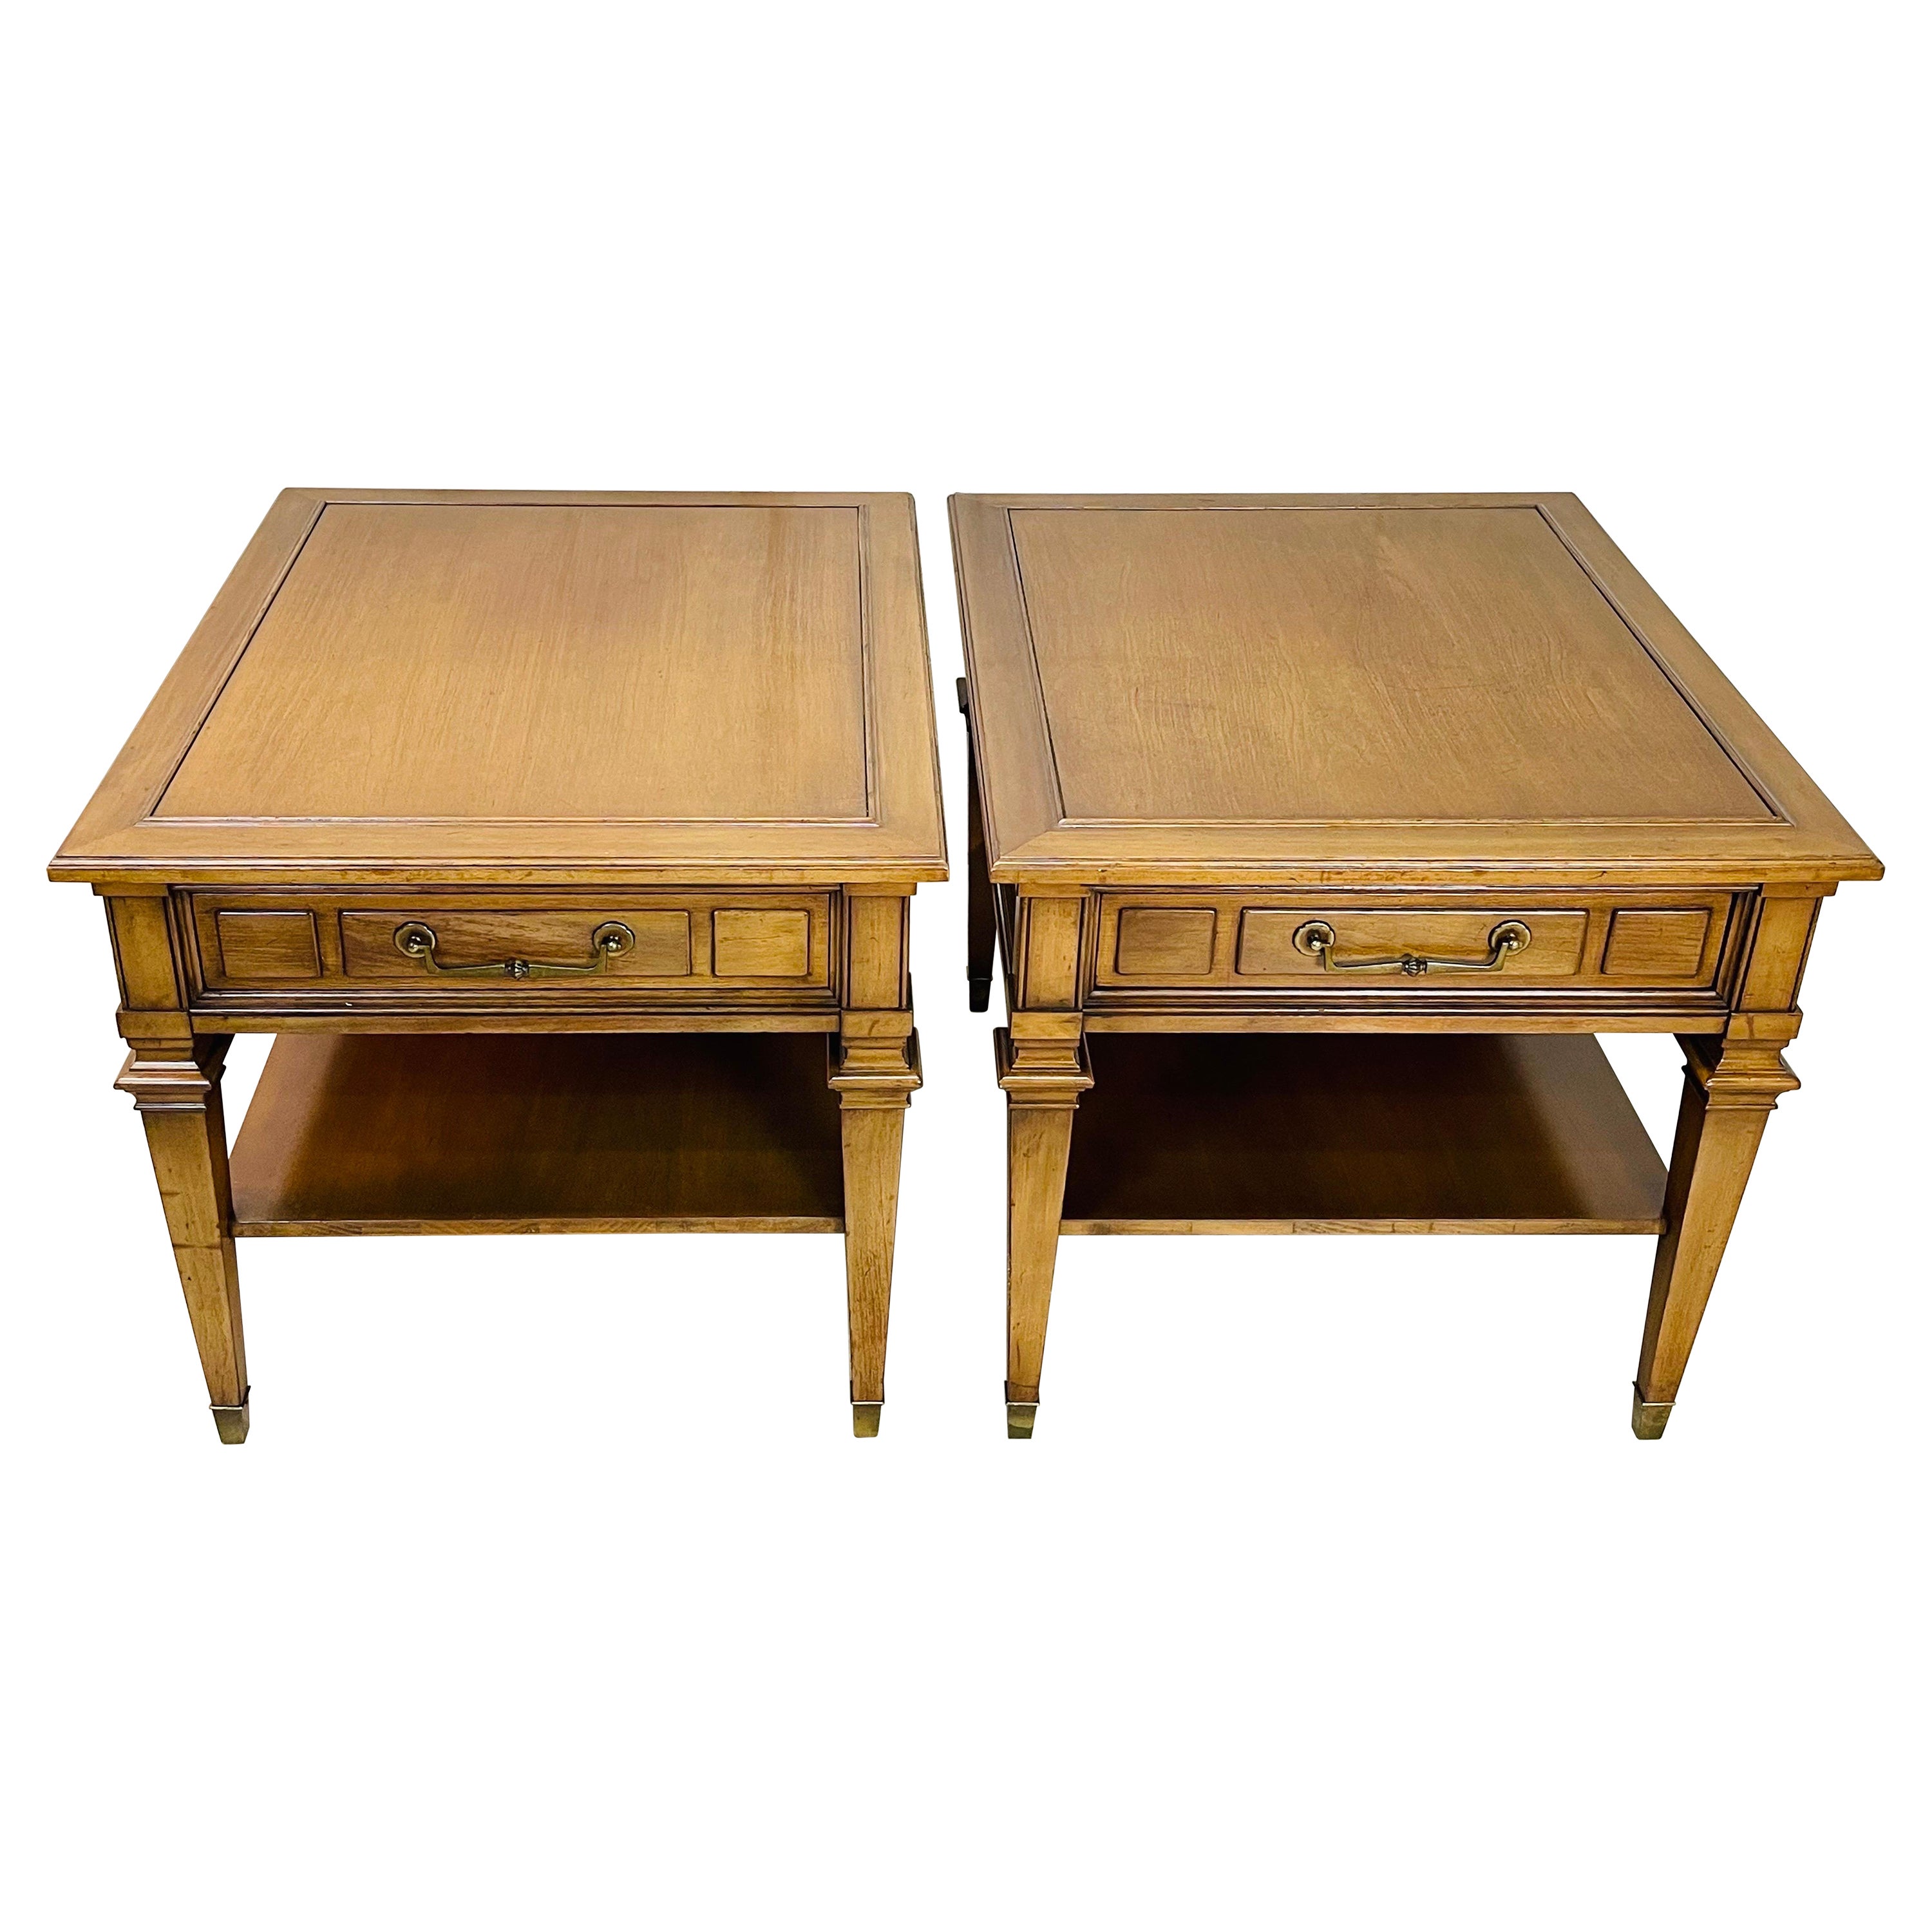 1960s, Hekman End Tables with Drawers, Pair For Sale